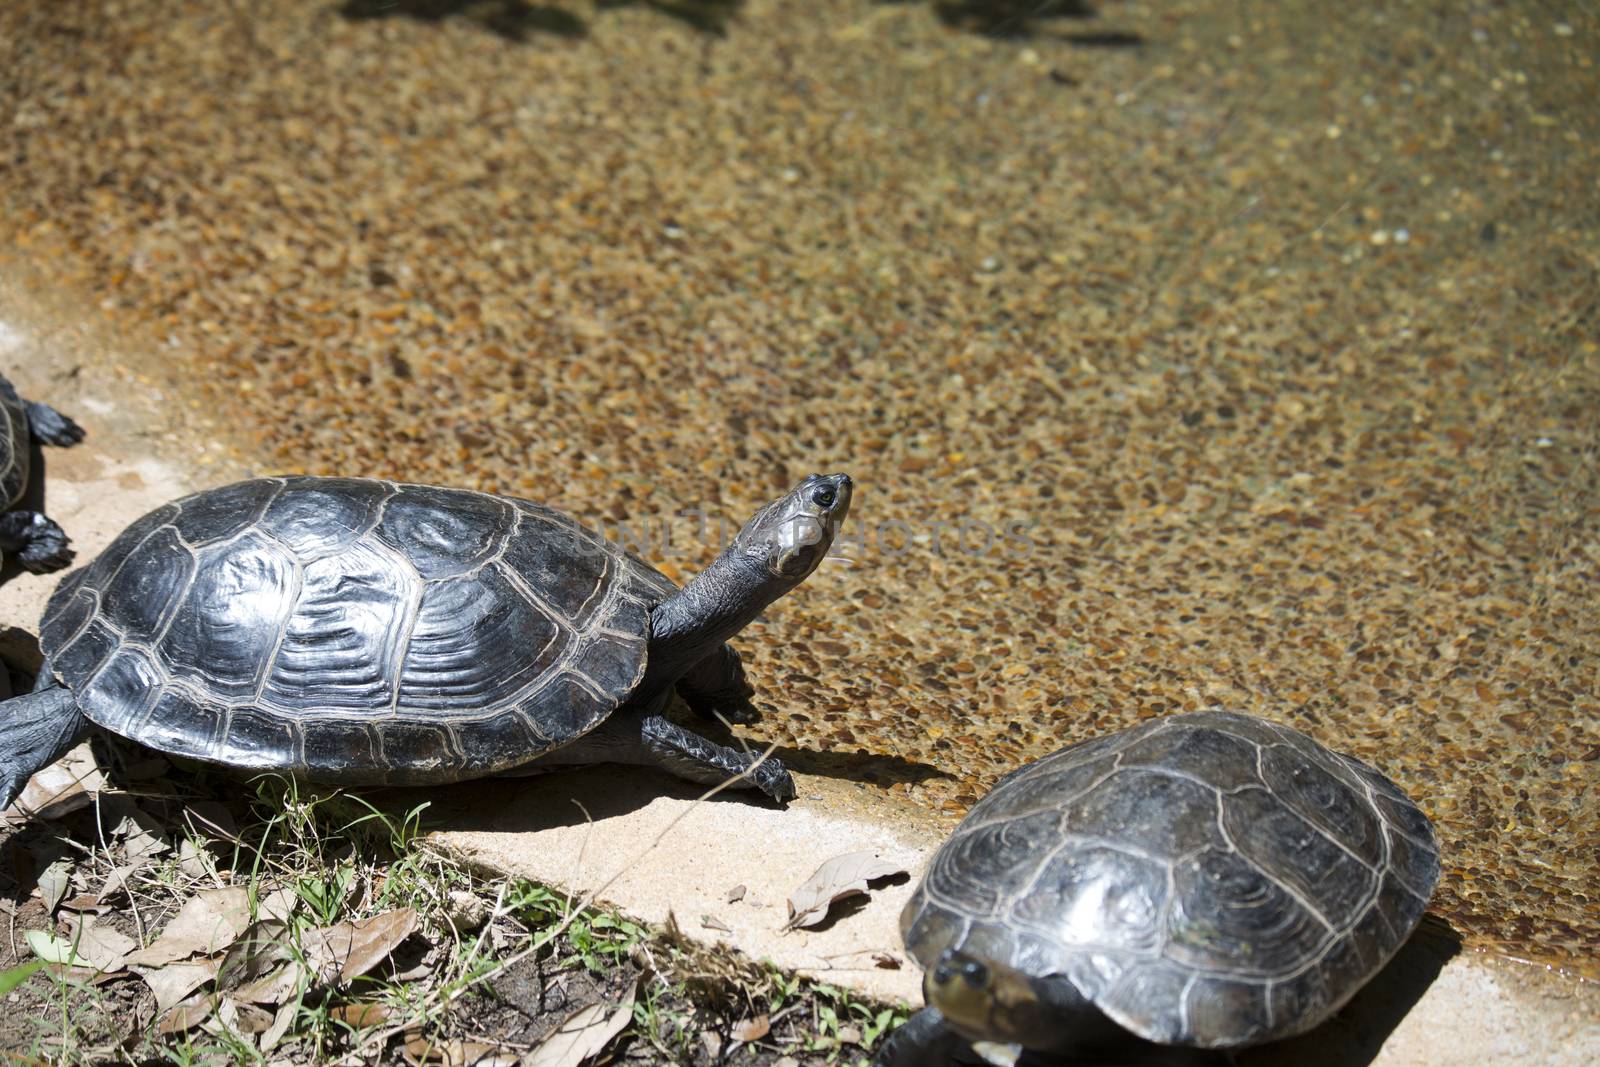 Yellow-spotted Amazon turtles (Podocnemis unifilis) climbing out of a pond